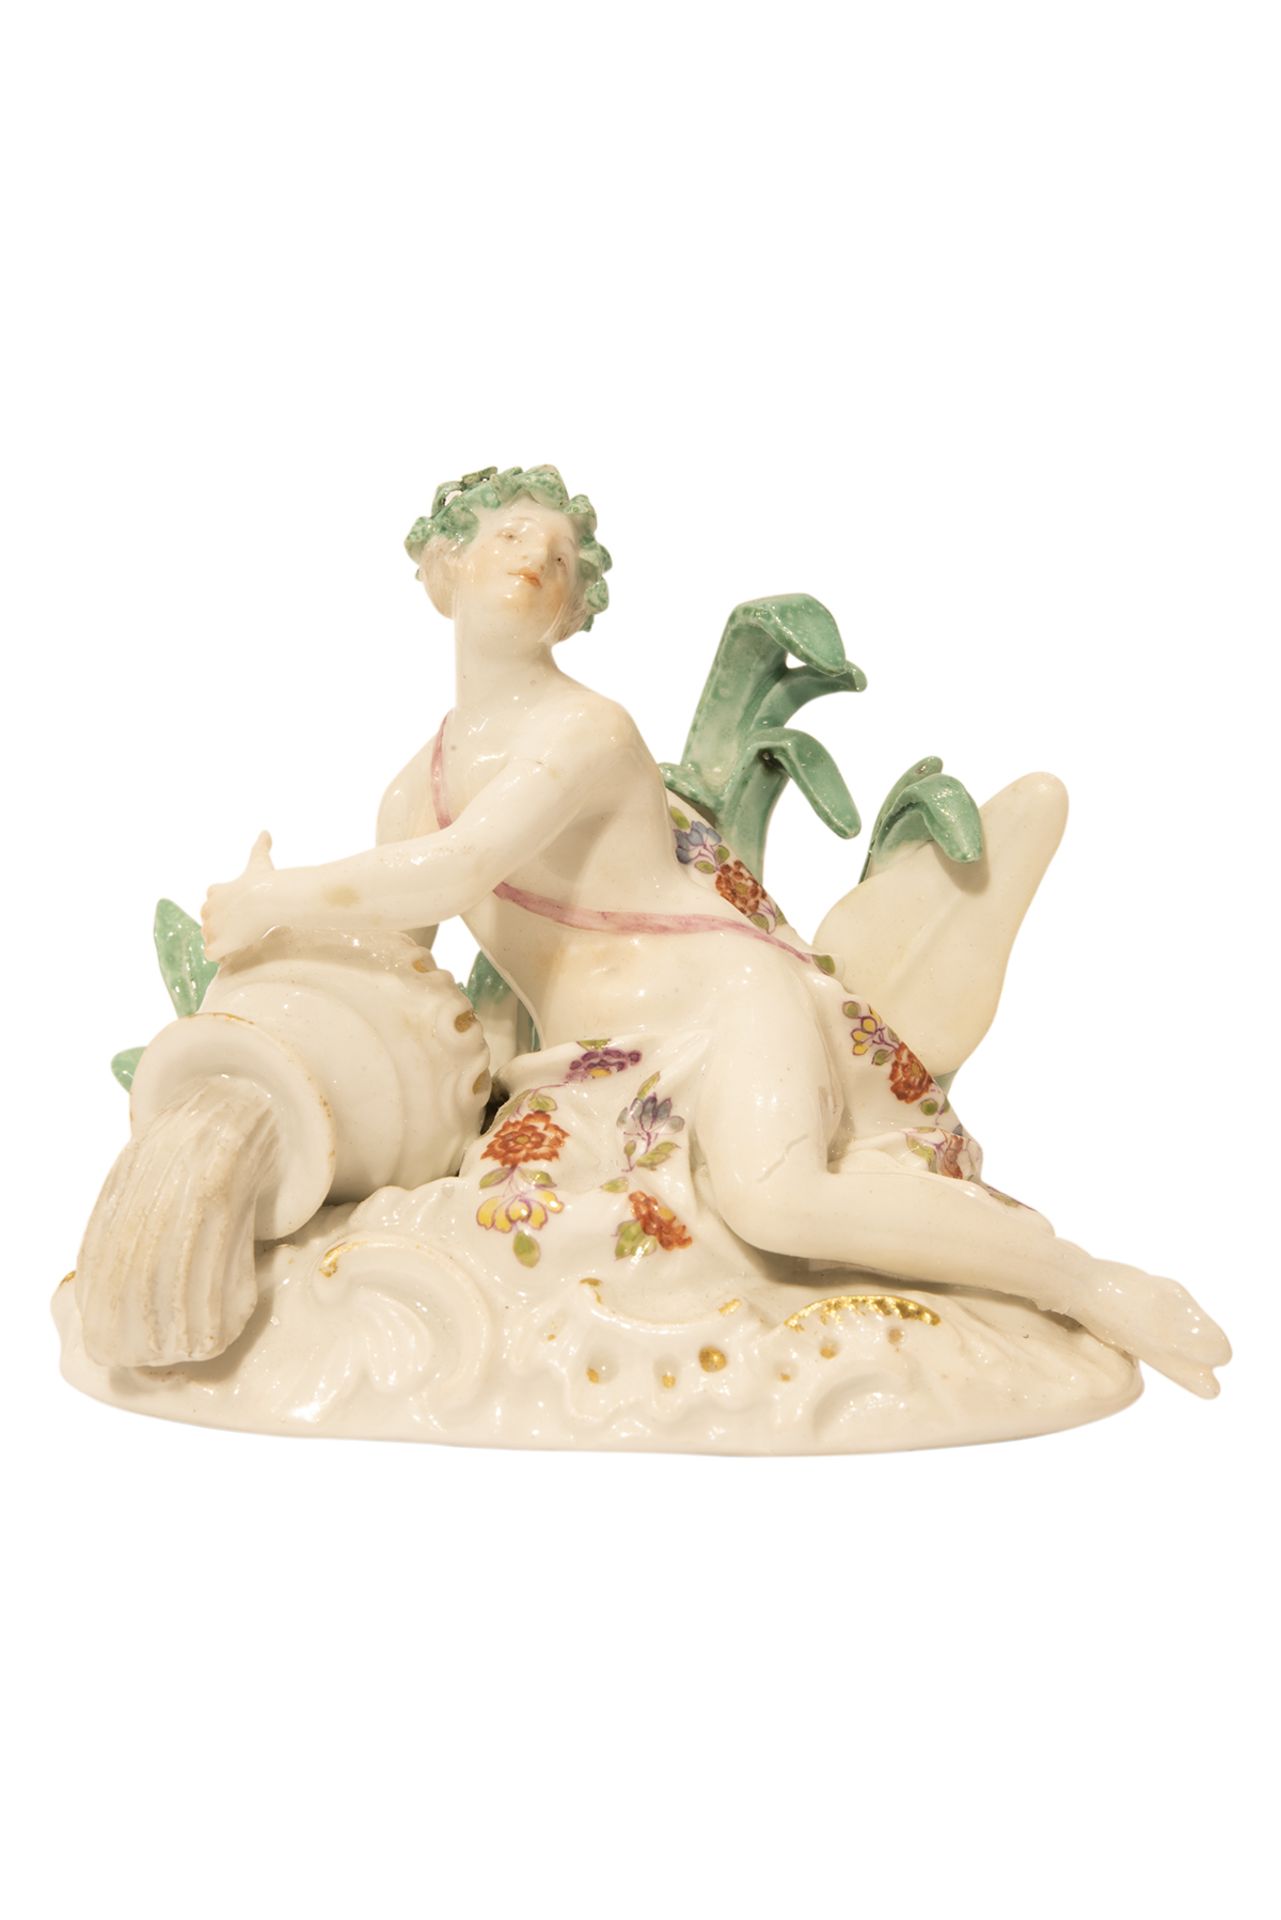 Two small figures river god and river goddess, Meissen 1750 - Image 5 of 6